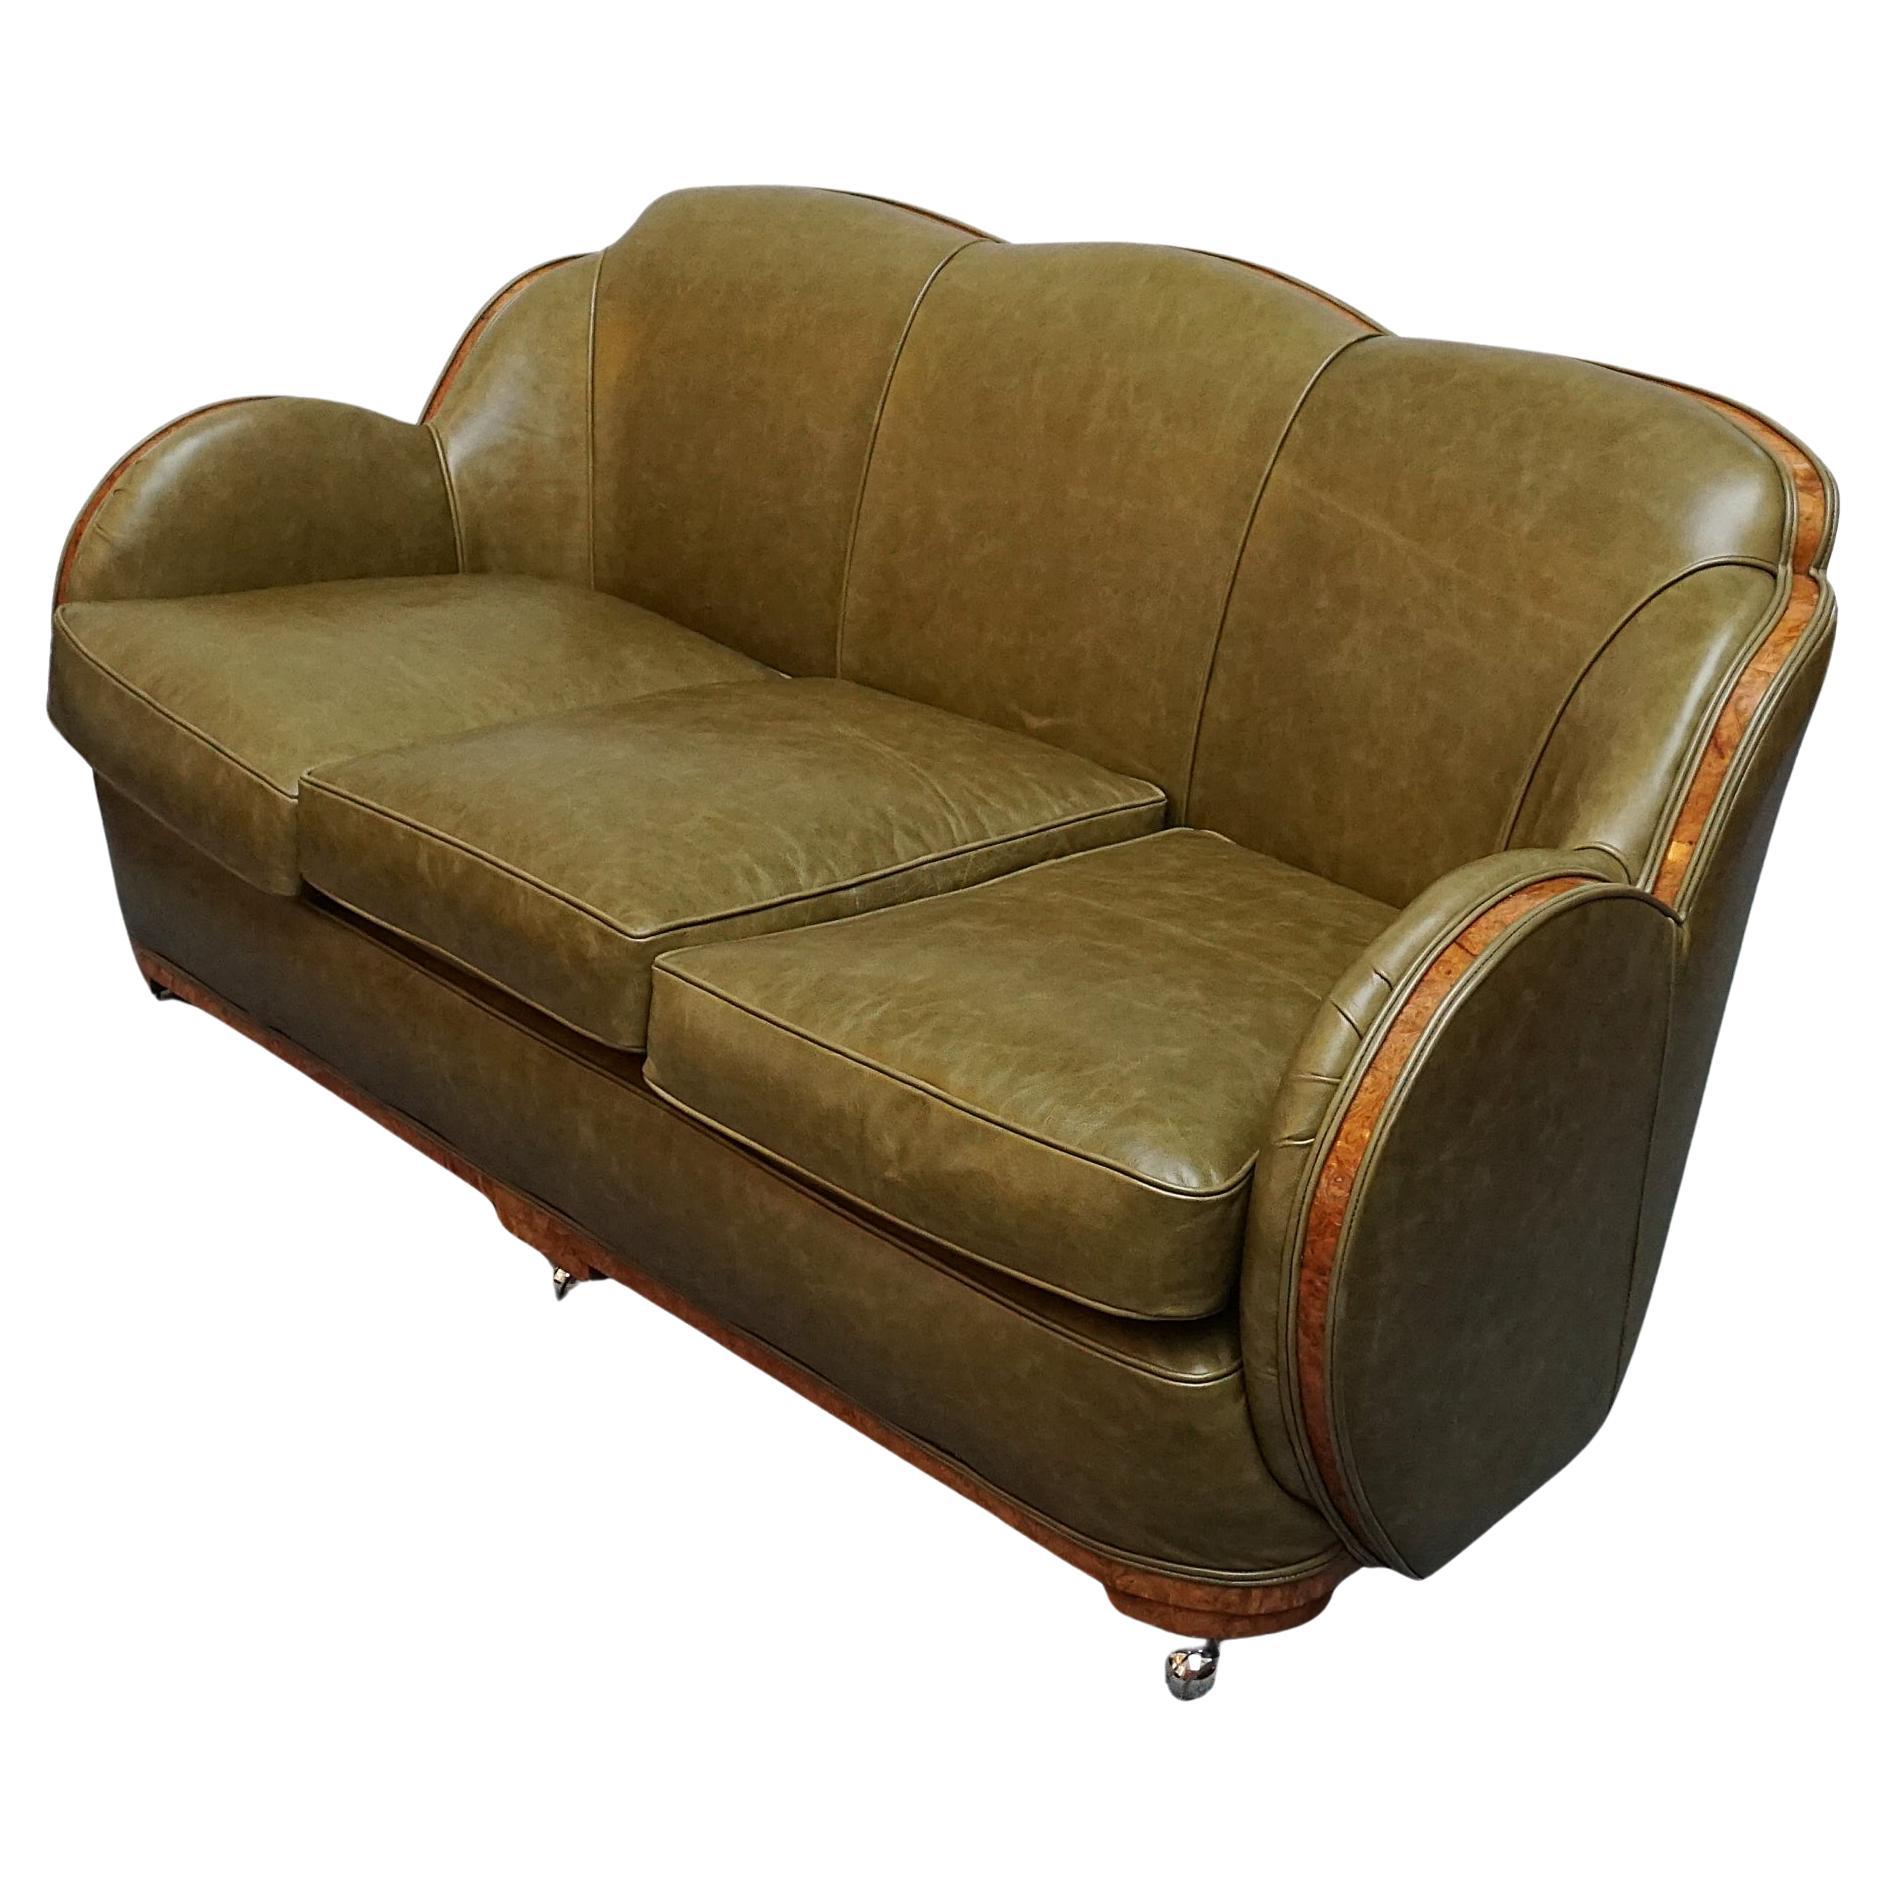 English Art Deco Cloud Sofa by Harry & Lou Epstein Upholstered in Green Leather 